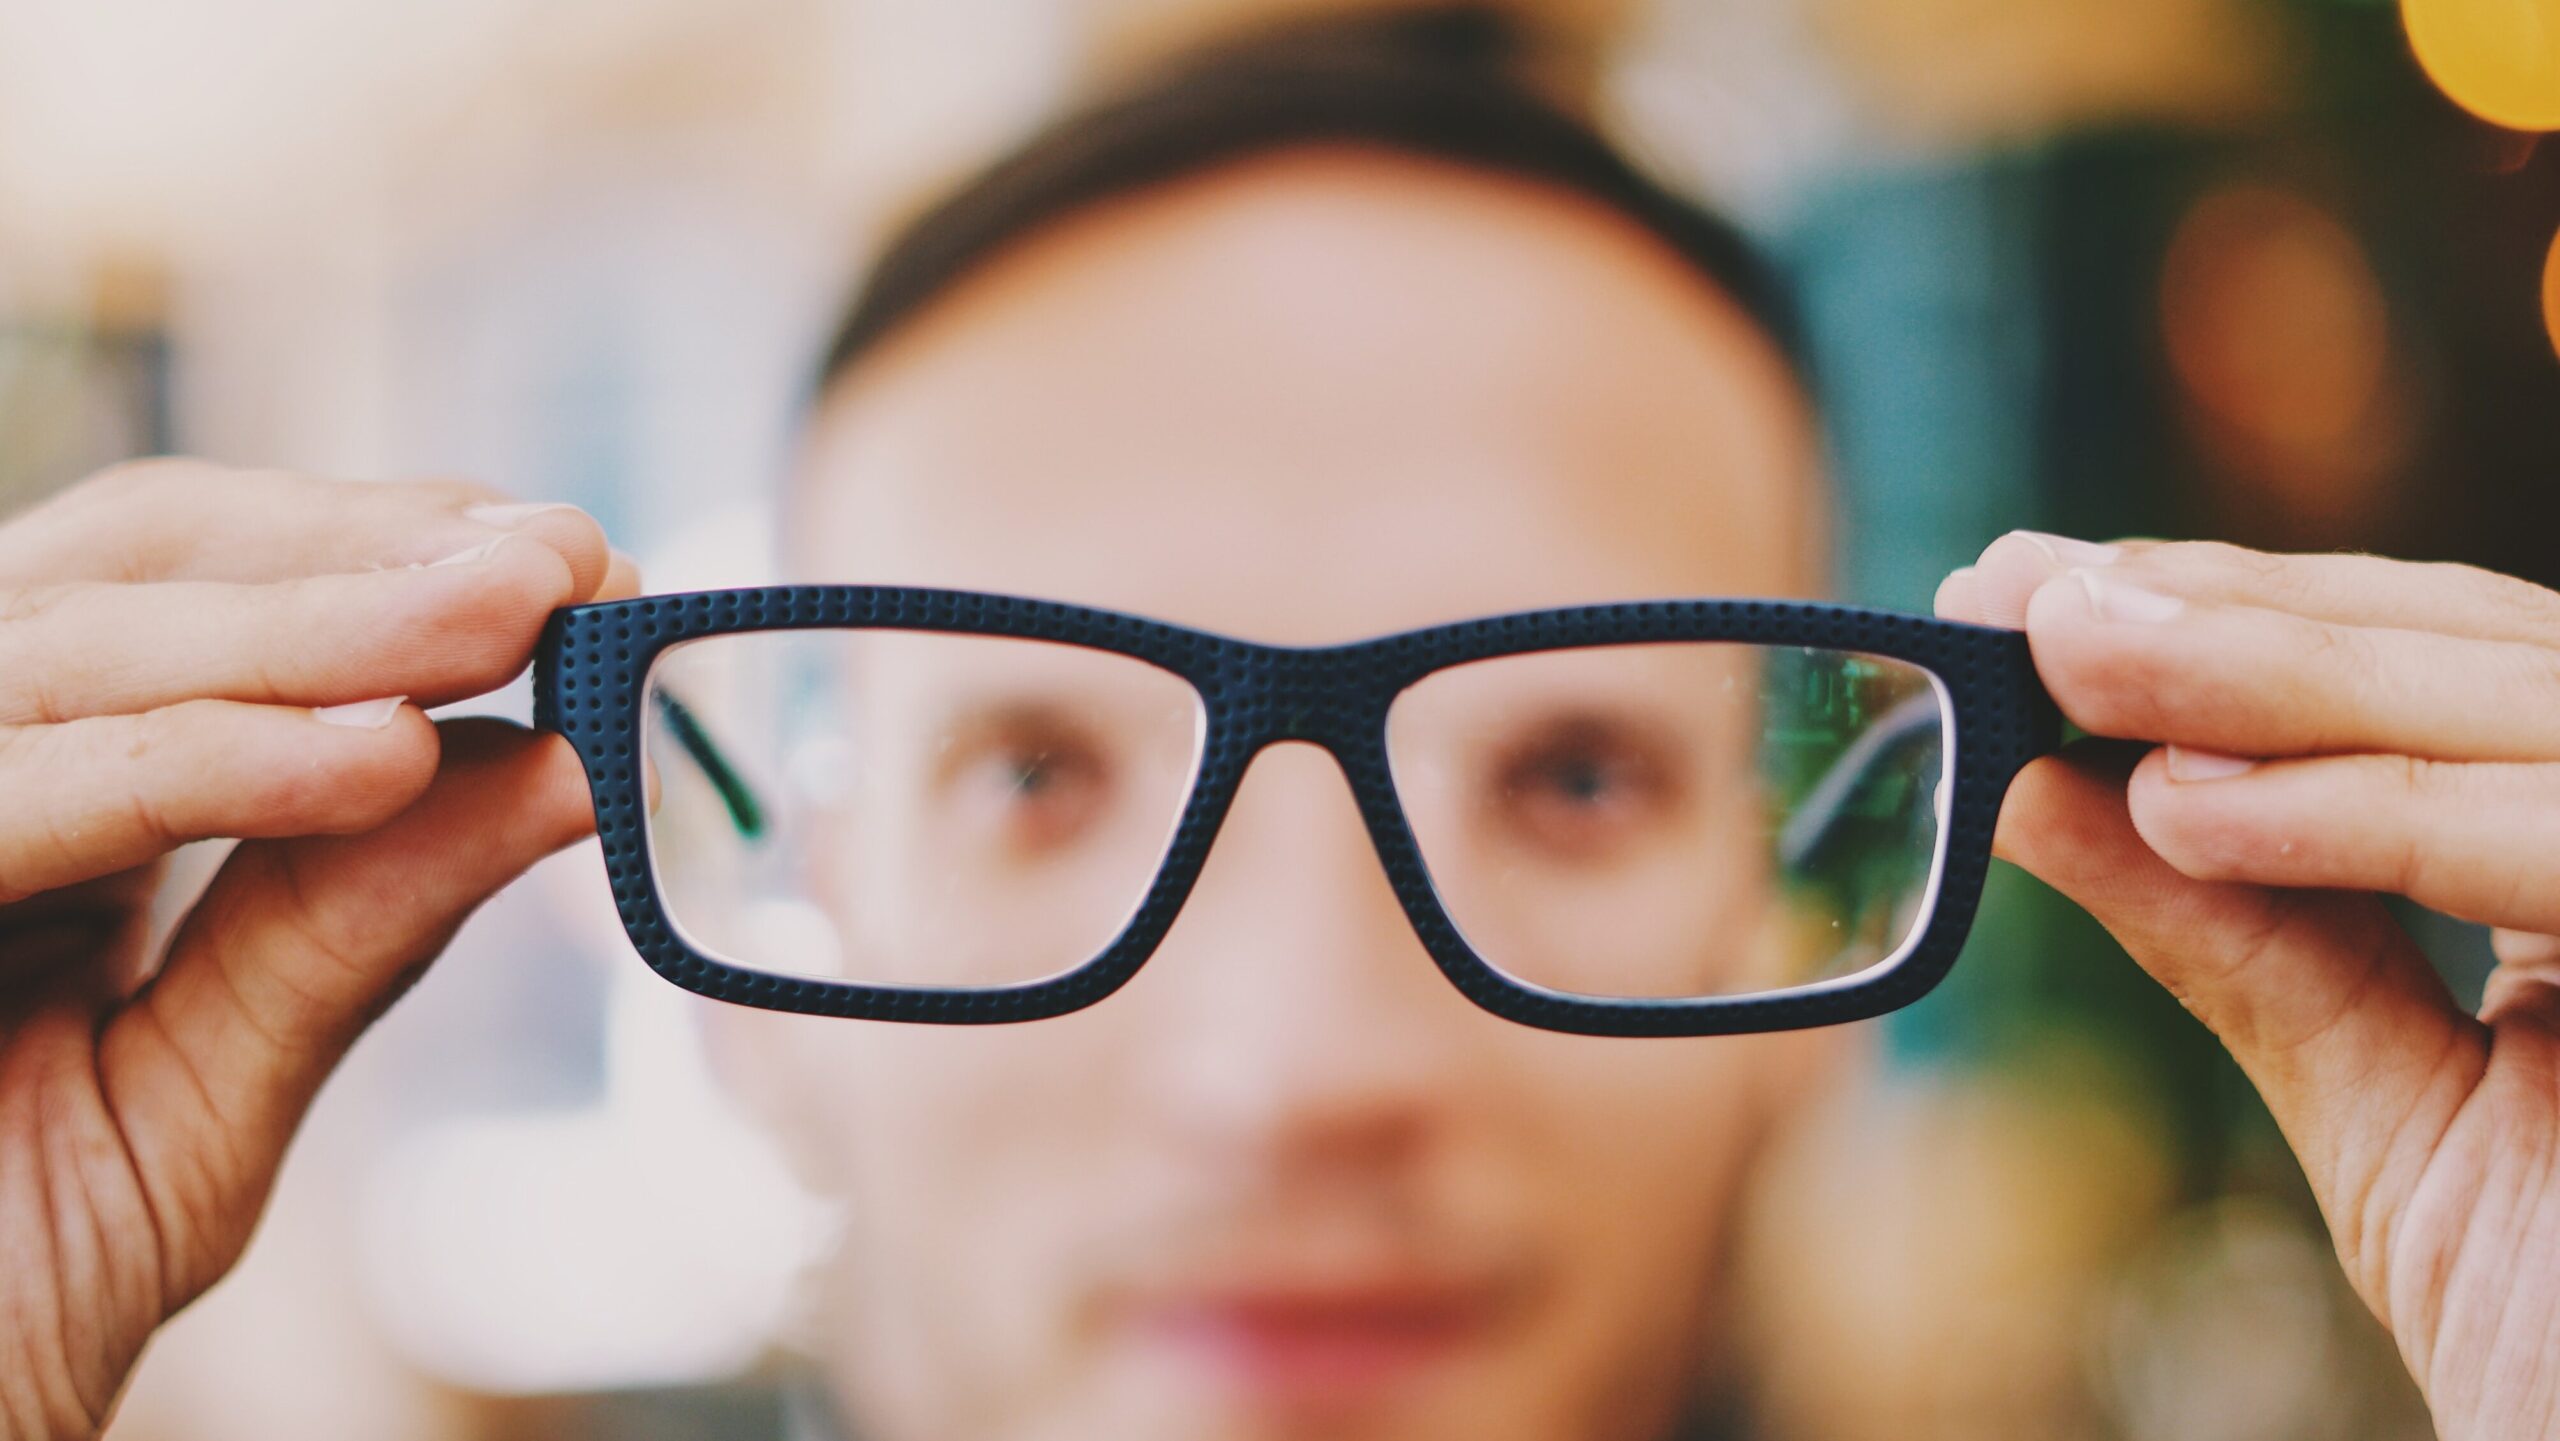 Blurry picture of a man holding his glasses in front of his face